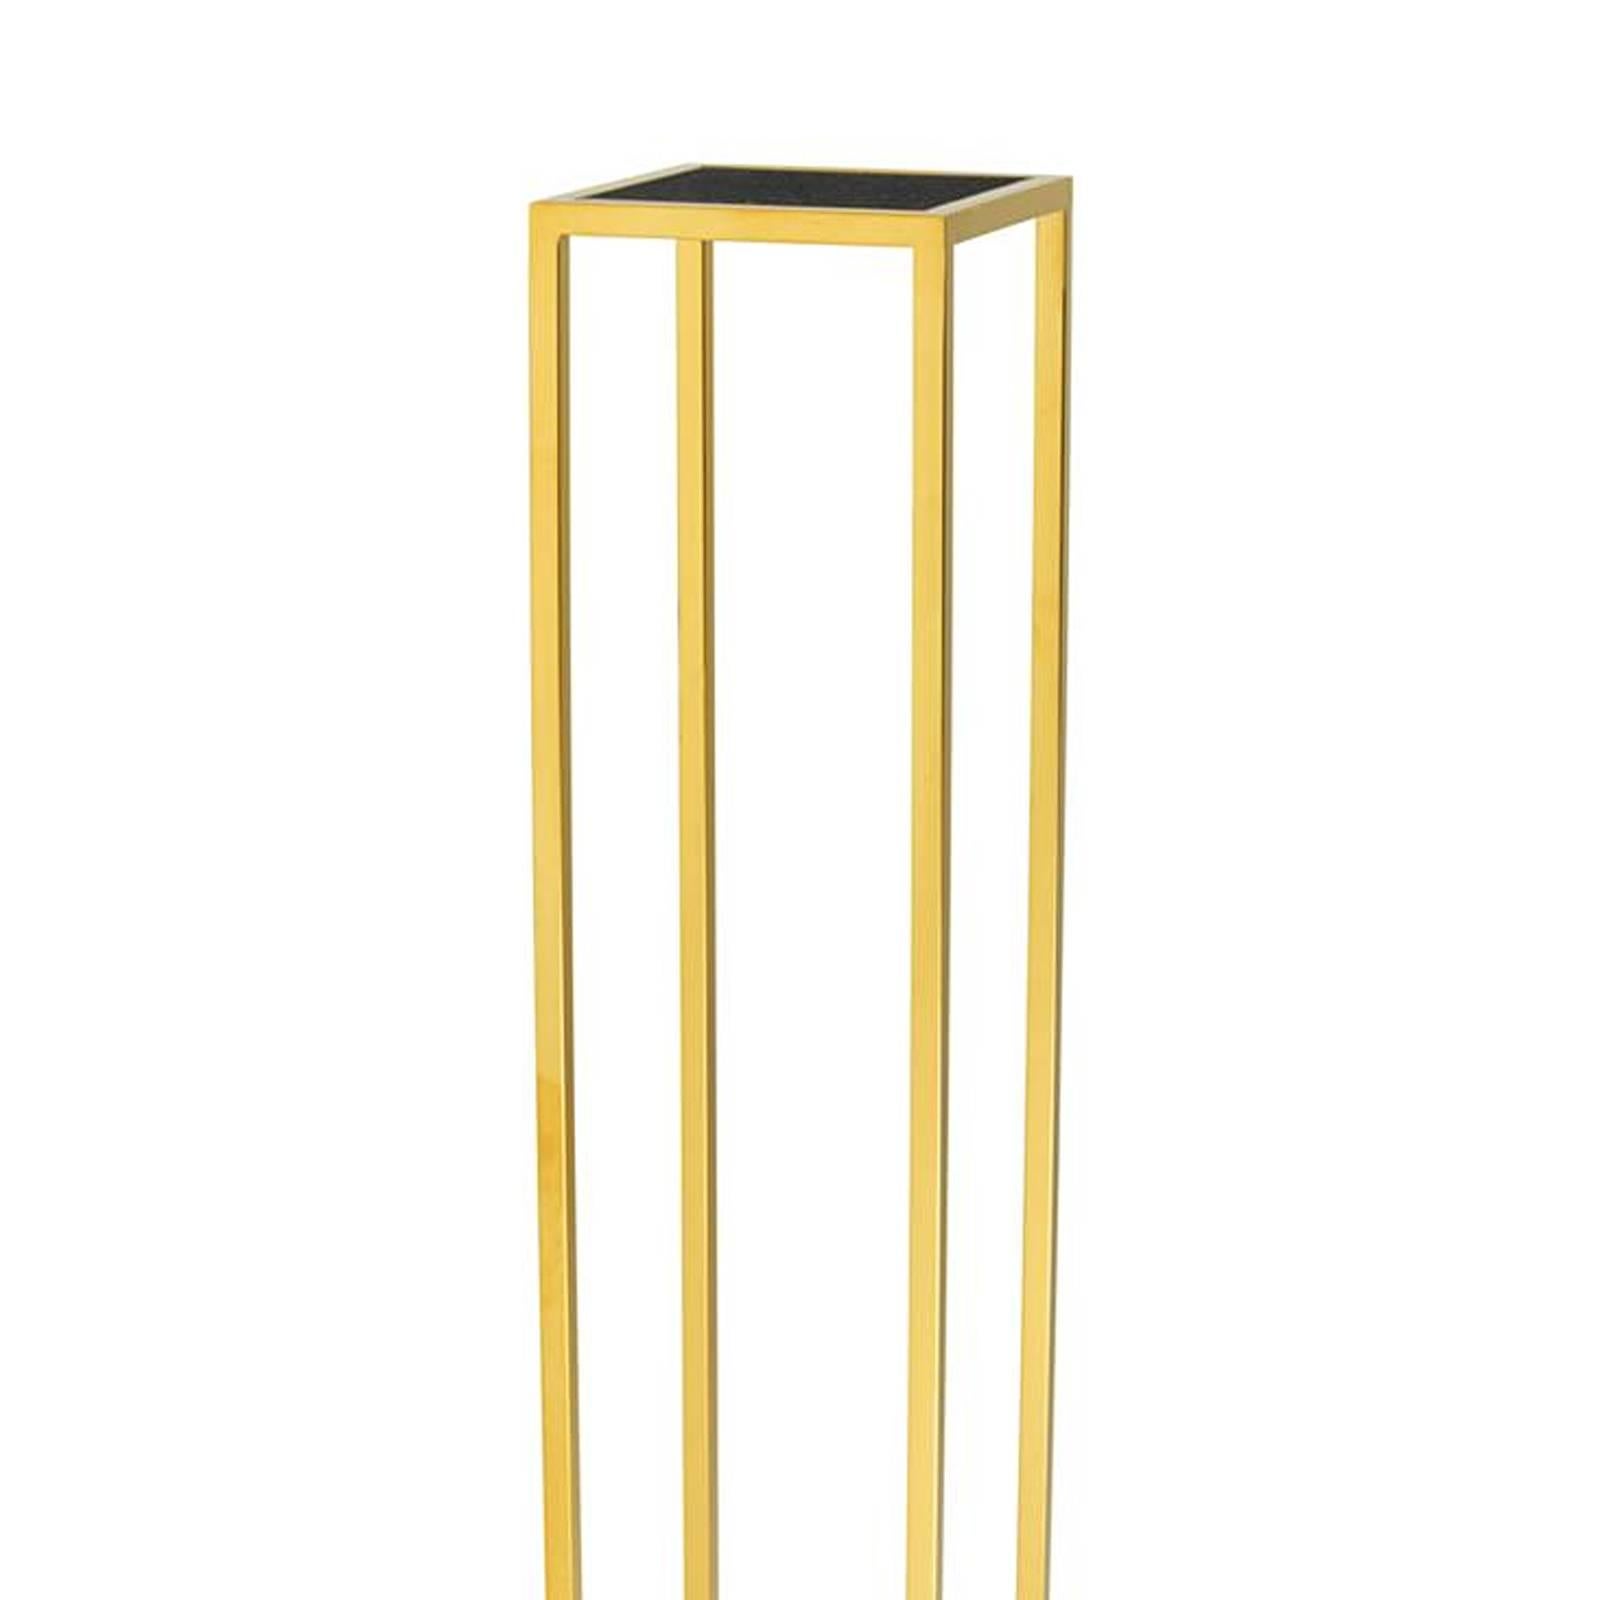 Blackened Orphy Colomn in Gold Finish or Polished Stainless Steel with Black Marble